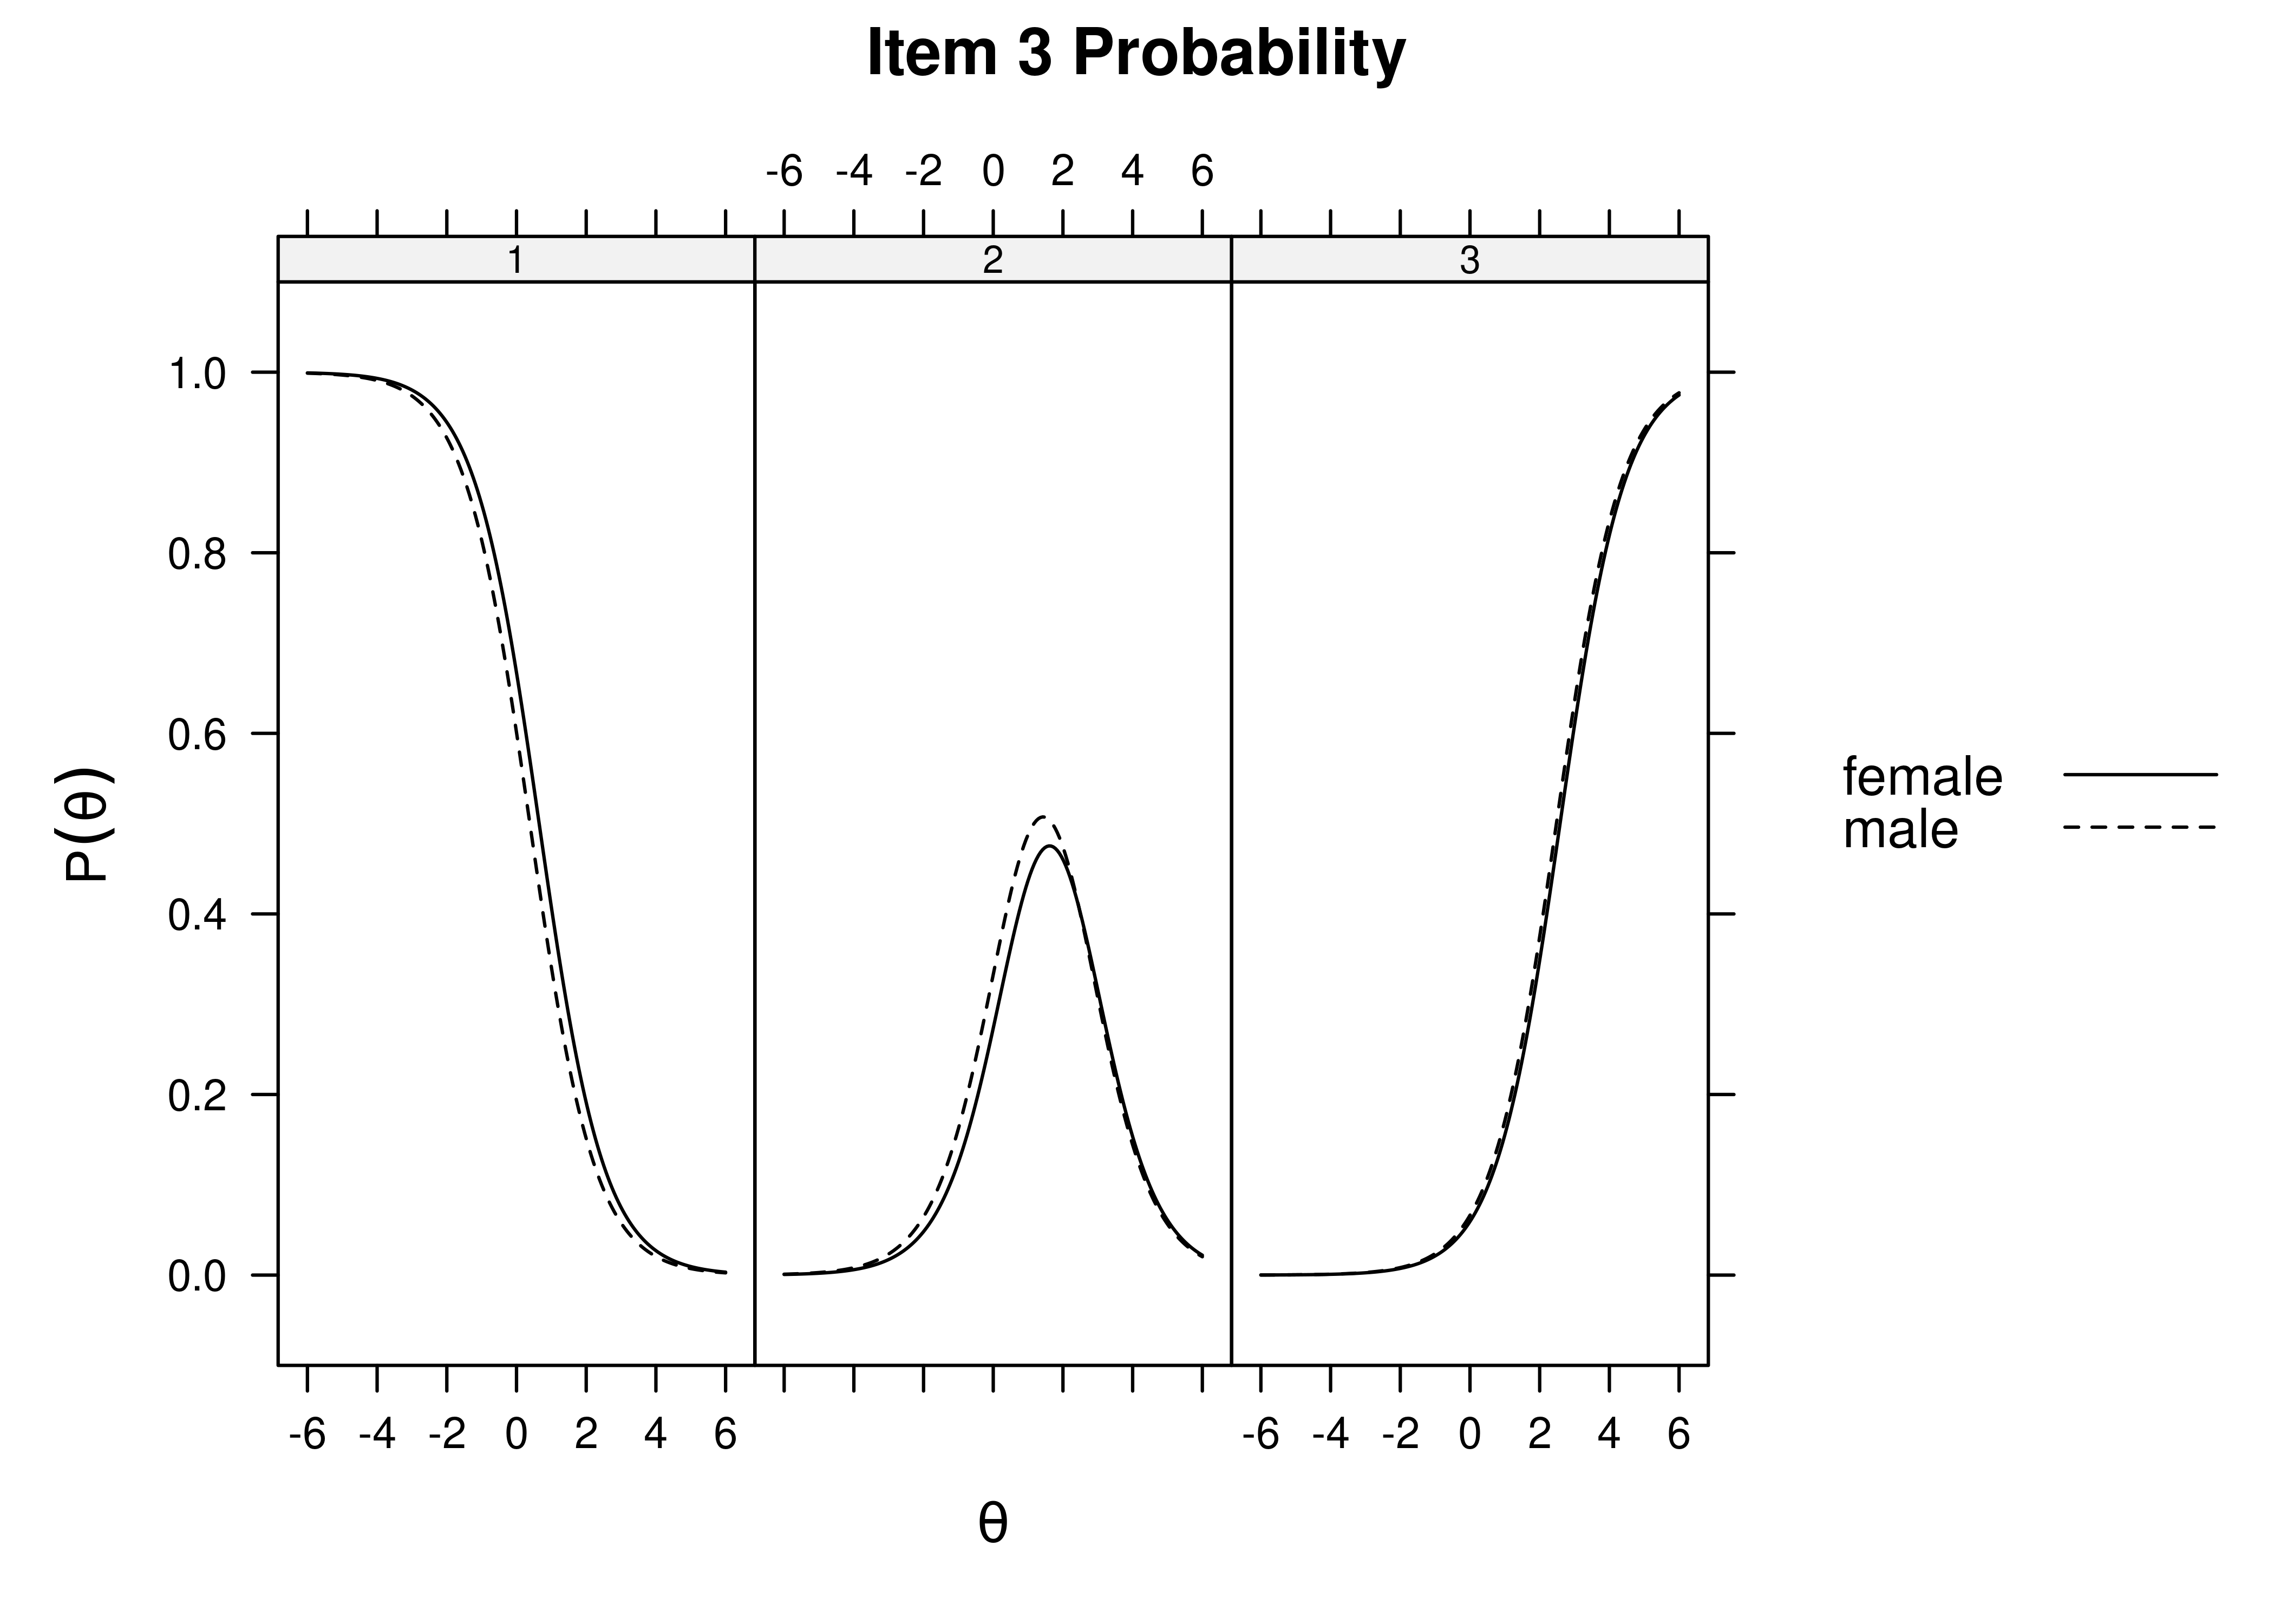 Item Response Category Characteristic Curves by Sex: Item 3.